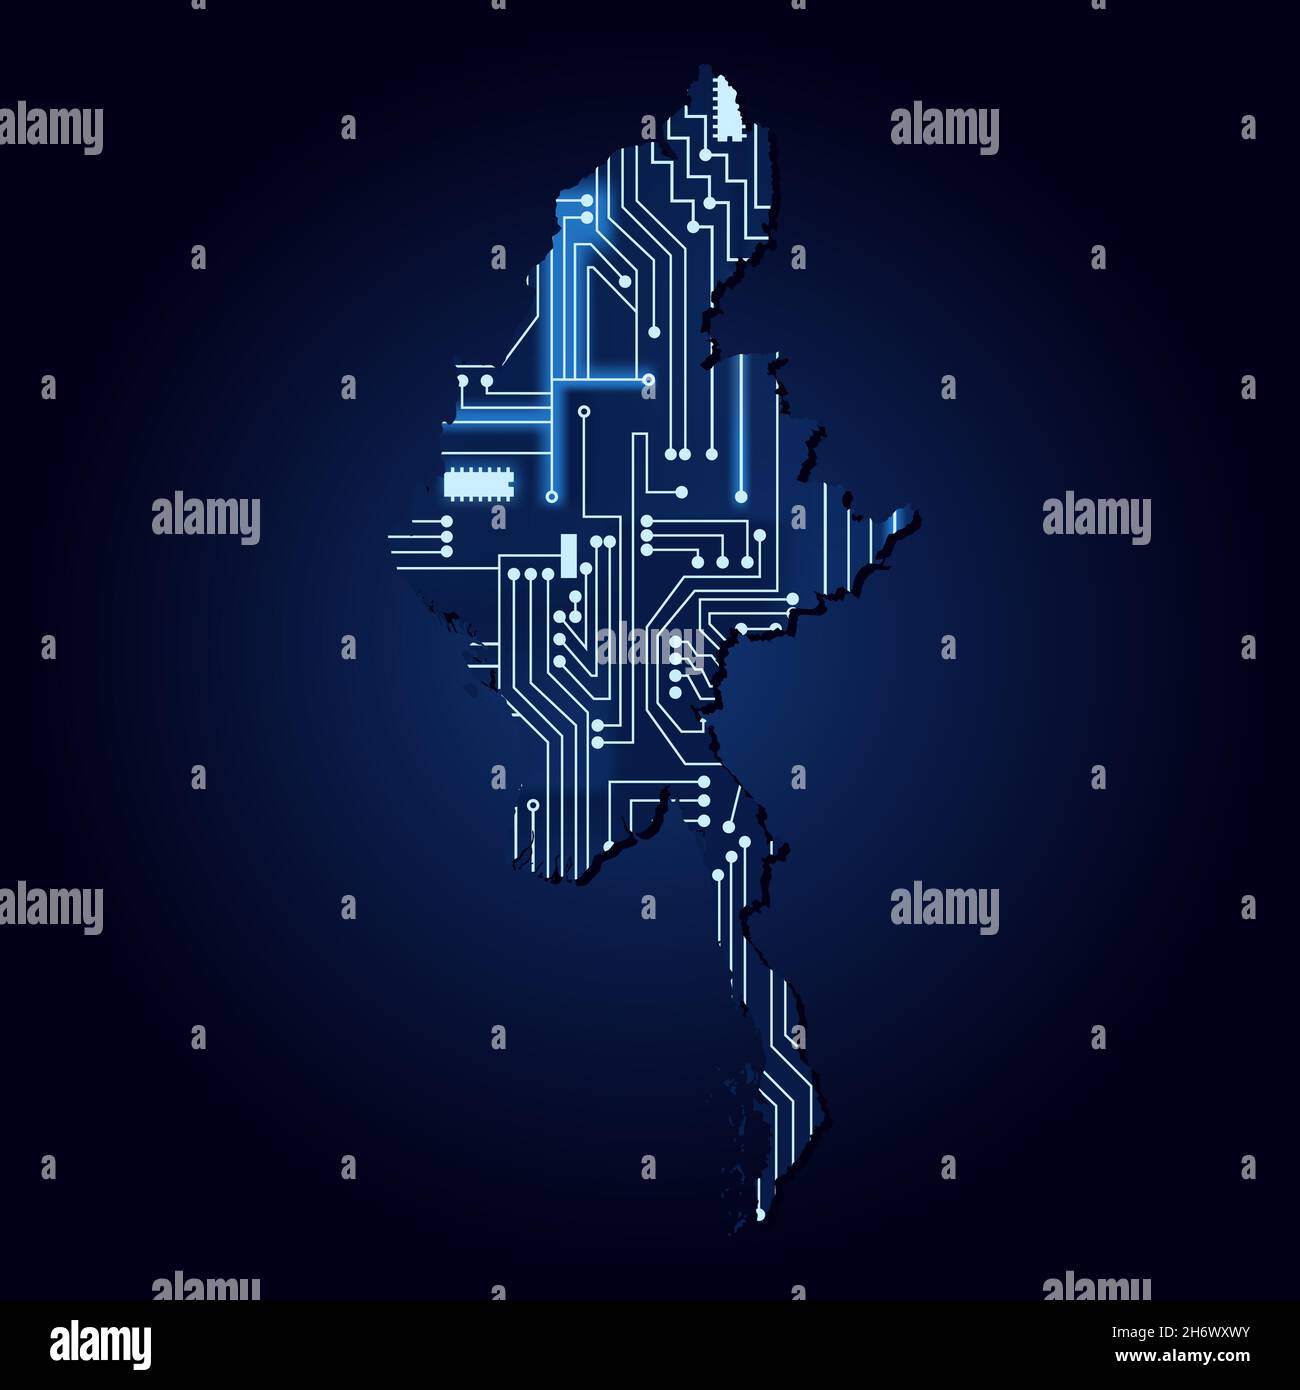 Contour map of Myanmar with a technological electronics circuit. Stock Vector